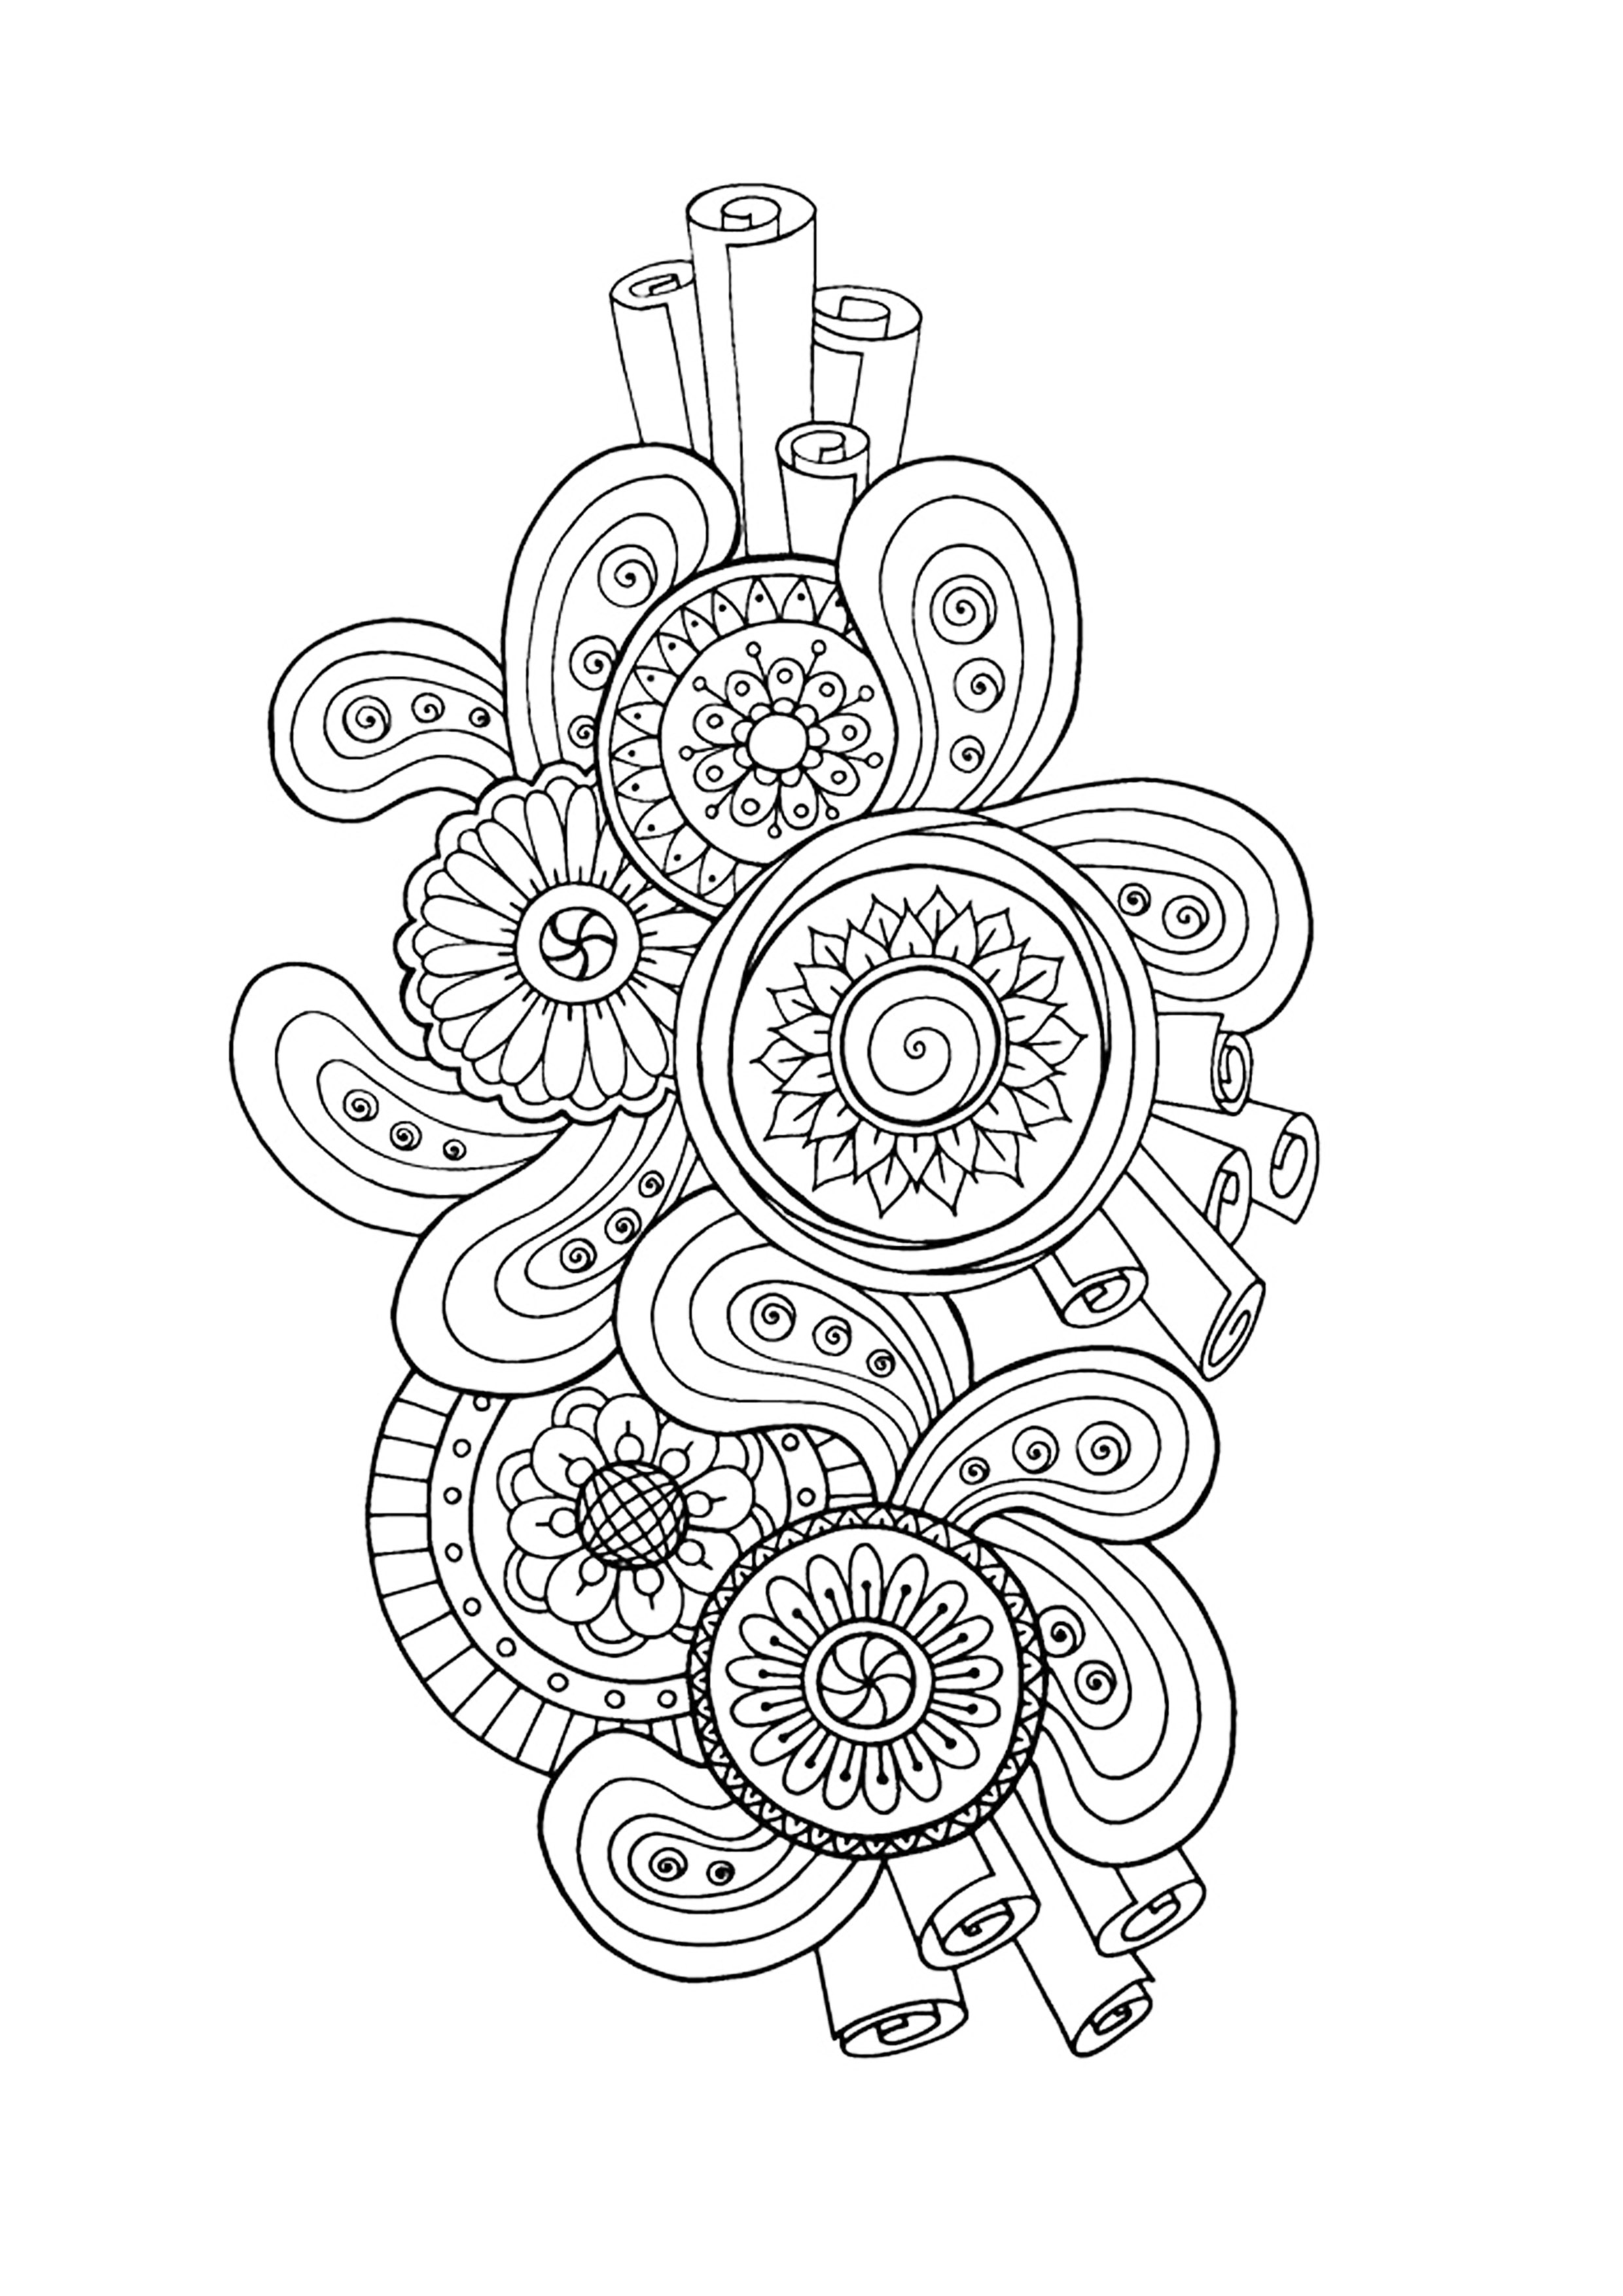 Download Abstract Coloring Pages For Adults